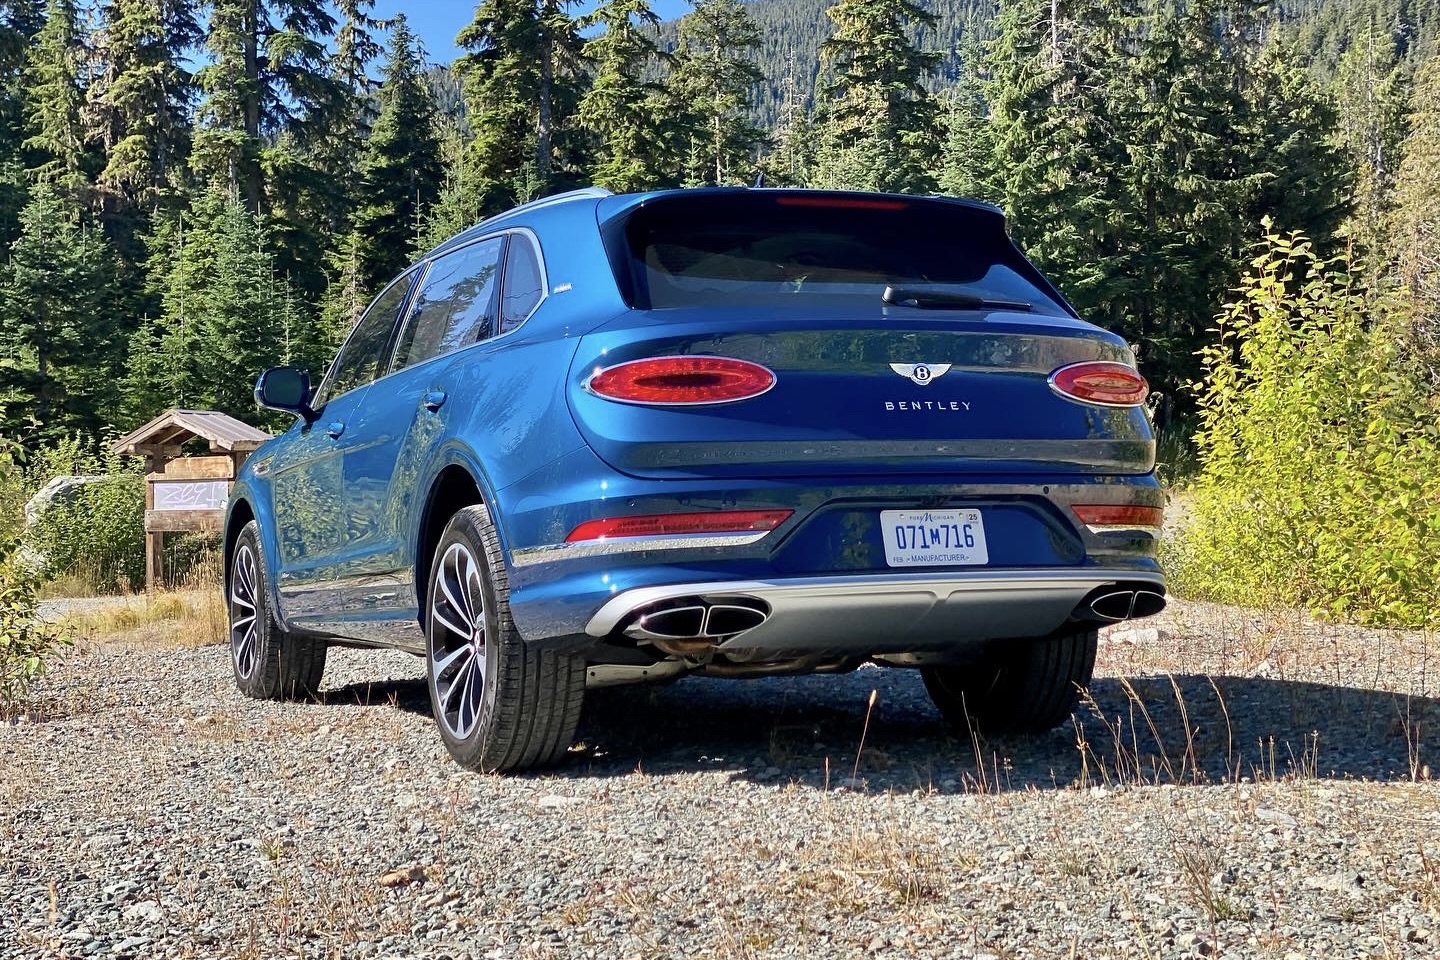 2023 Bentley Bentayga EWB rear end from driver's side on a gravel path with green trees in the back.